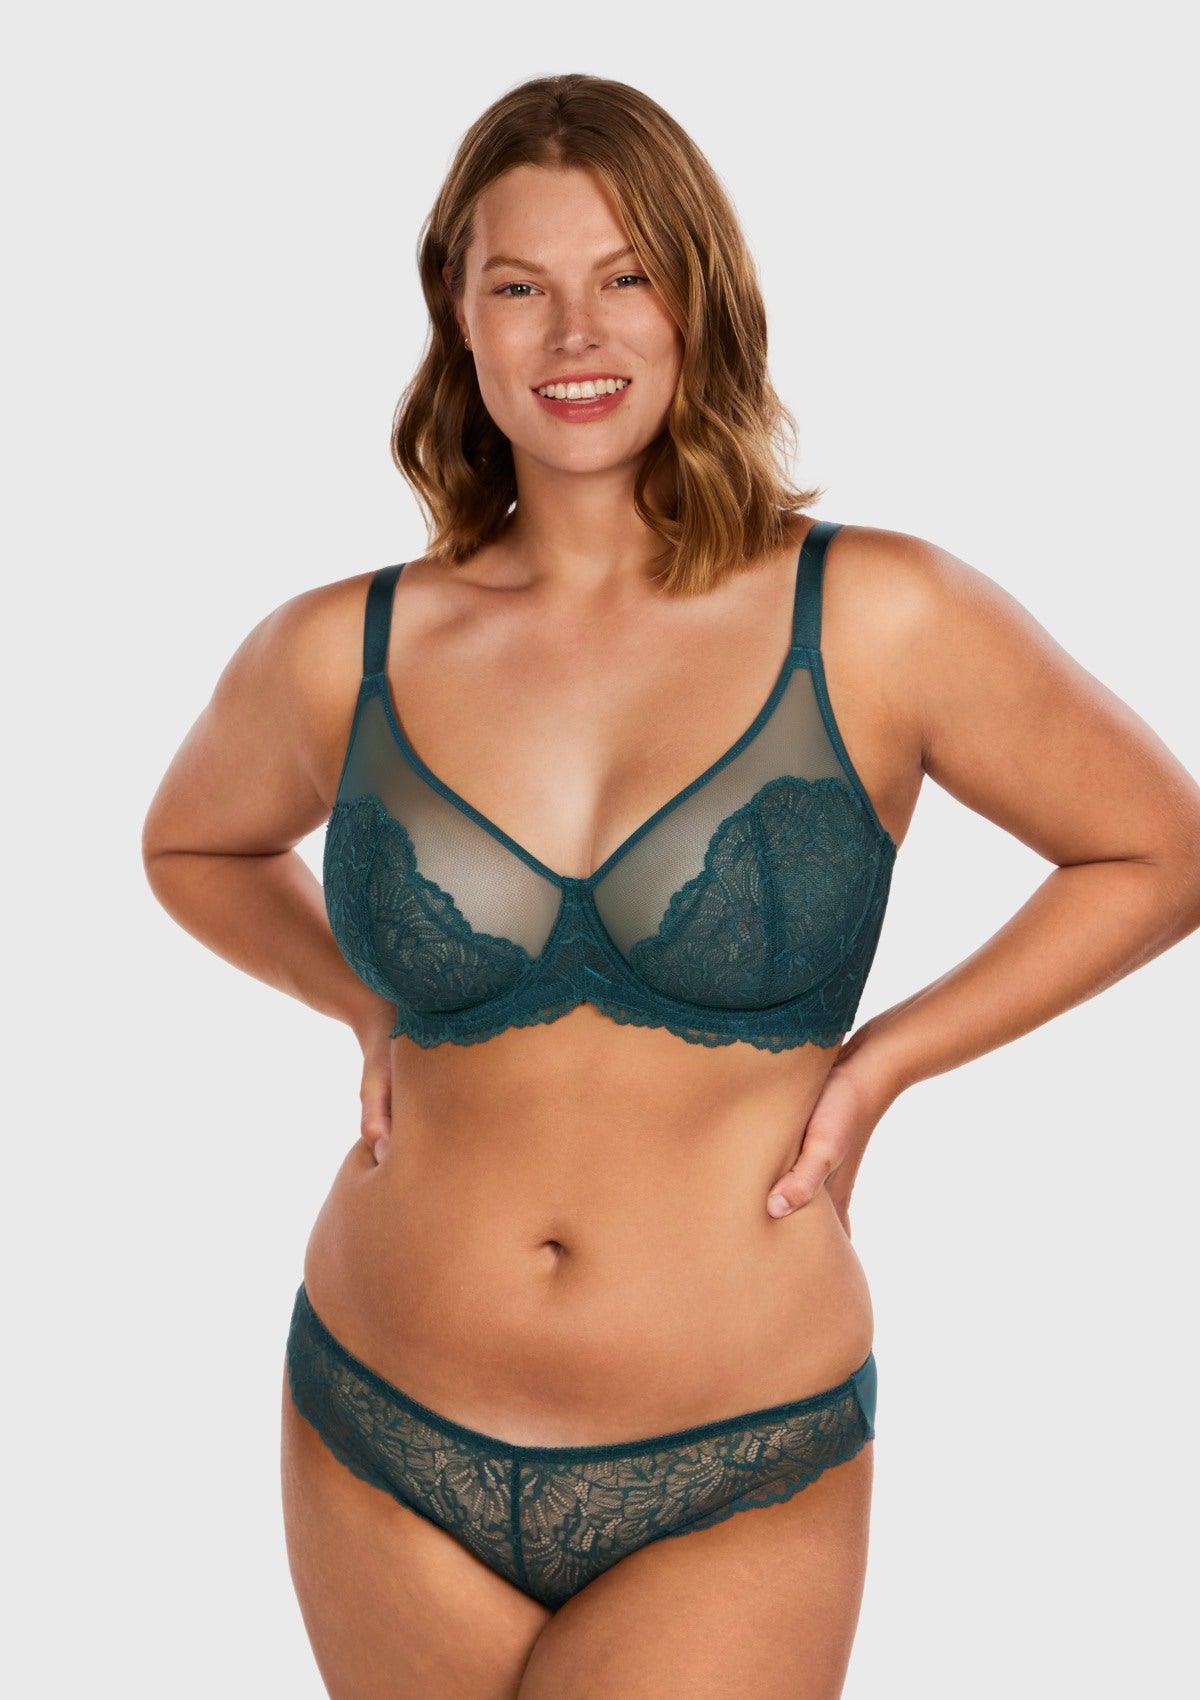 HSIA Blossom Full Figure See-Through Lace Bra For Side And Back Fat - Biscay Blue / 34 / C